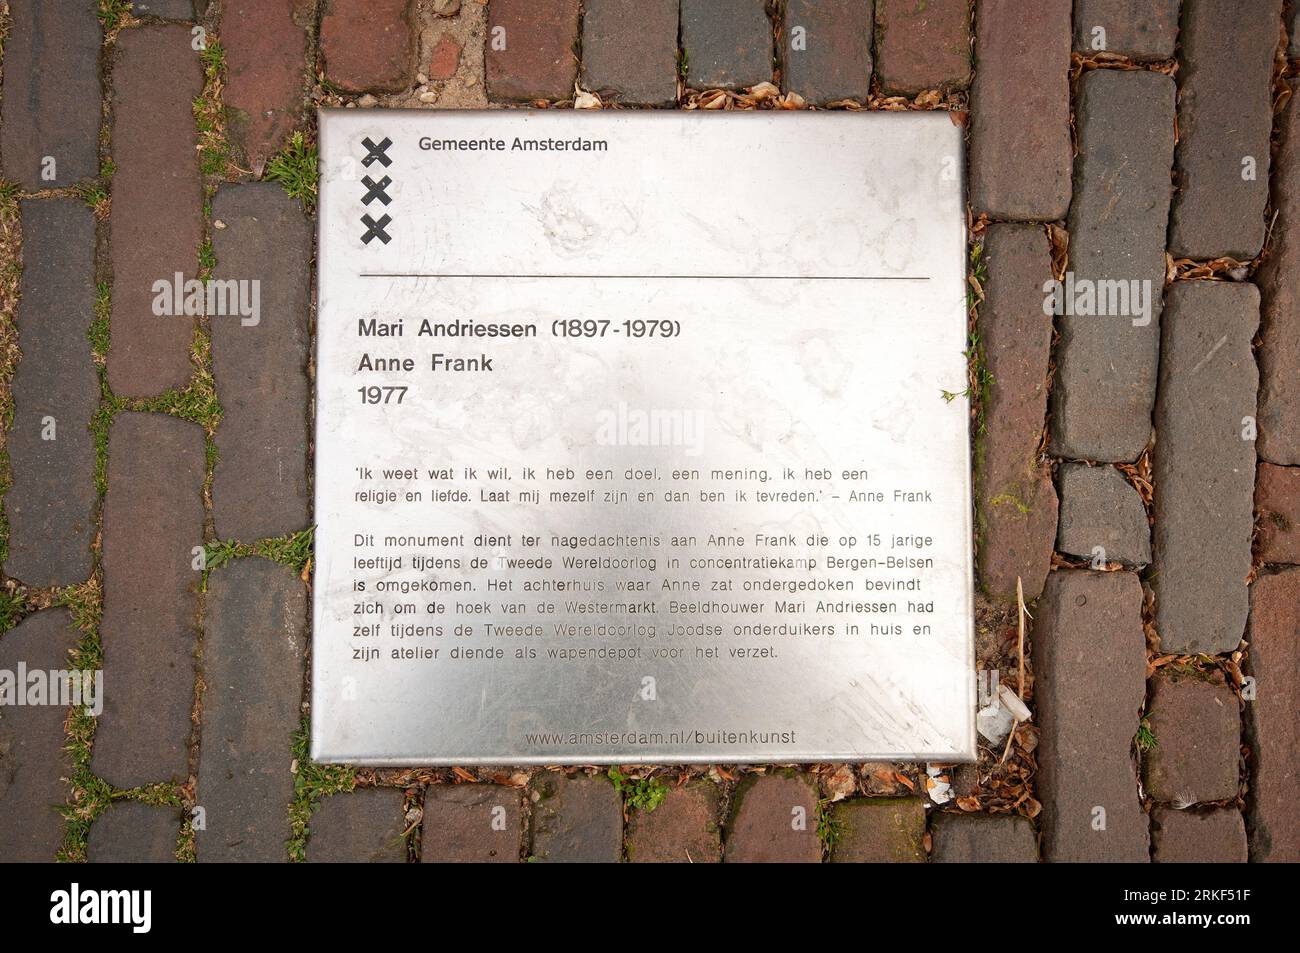 Metal plaque on the ground next the Anne Frank statue (made in 1977 by the dutch sculptor Mari Andriessen, 1897-1979), Amsterdam, Netherlands Stock Photo